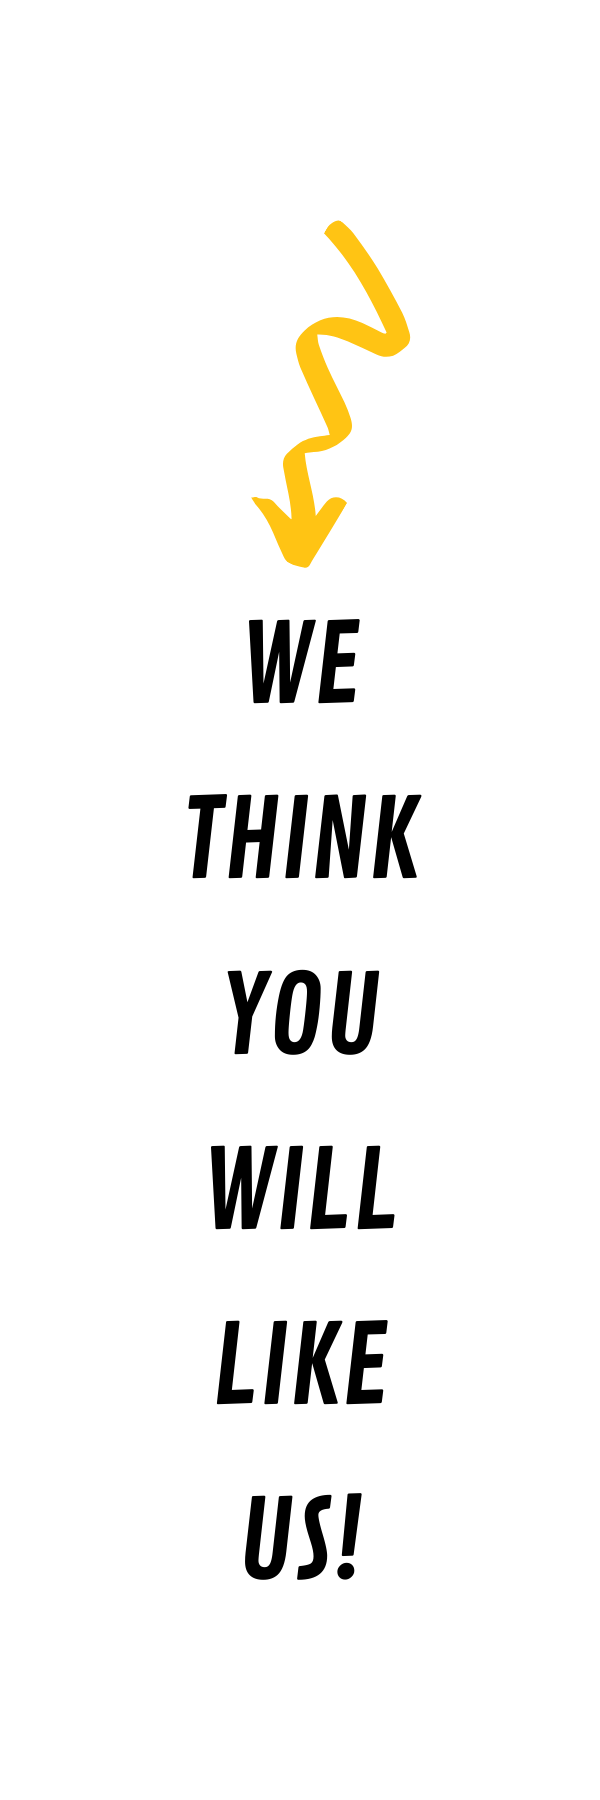 we-think-you-will-like-us.png